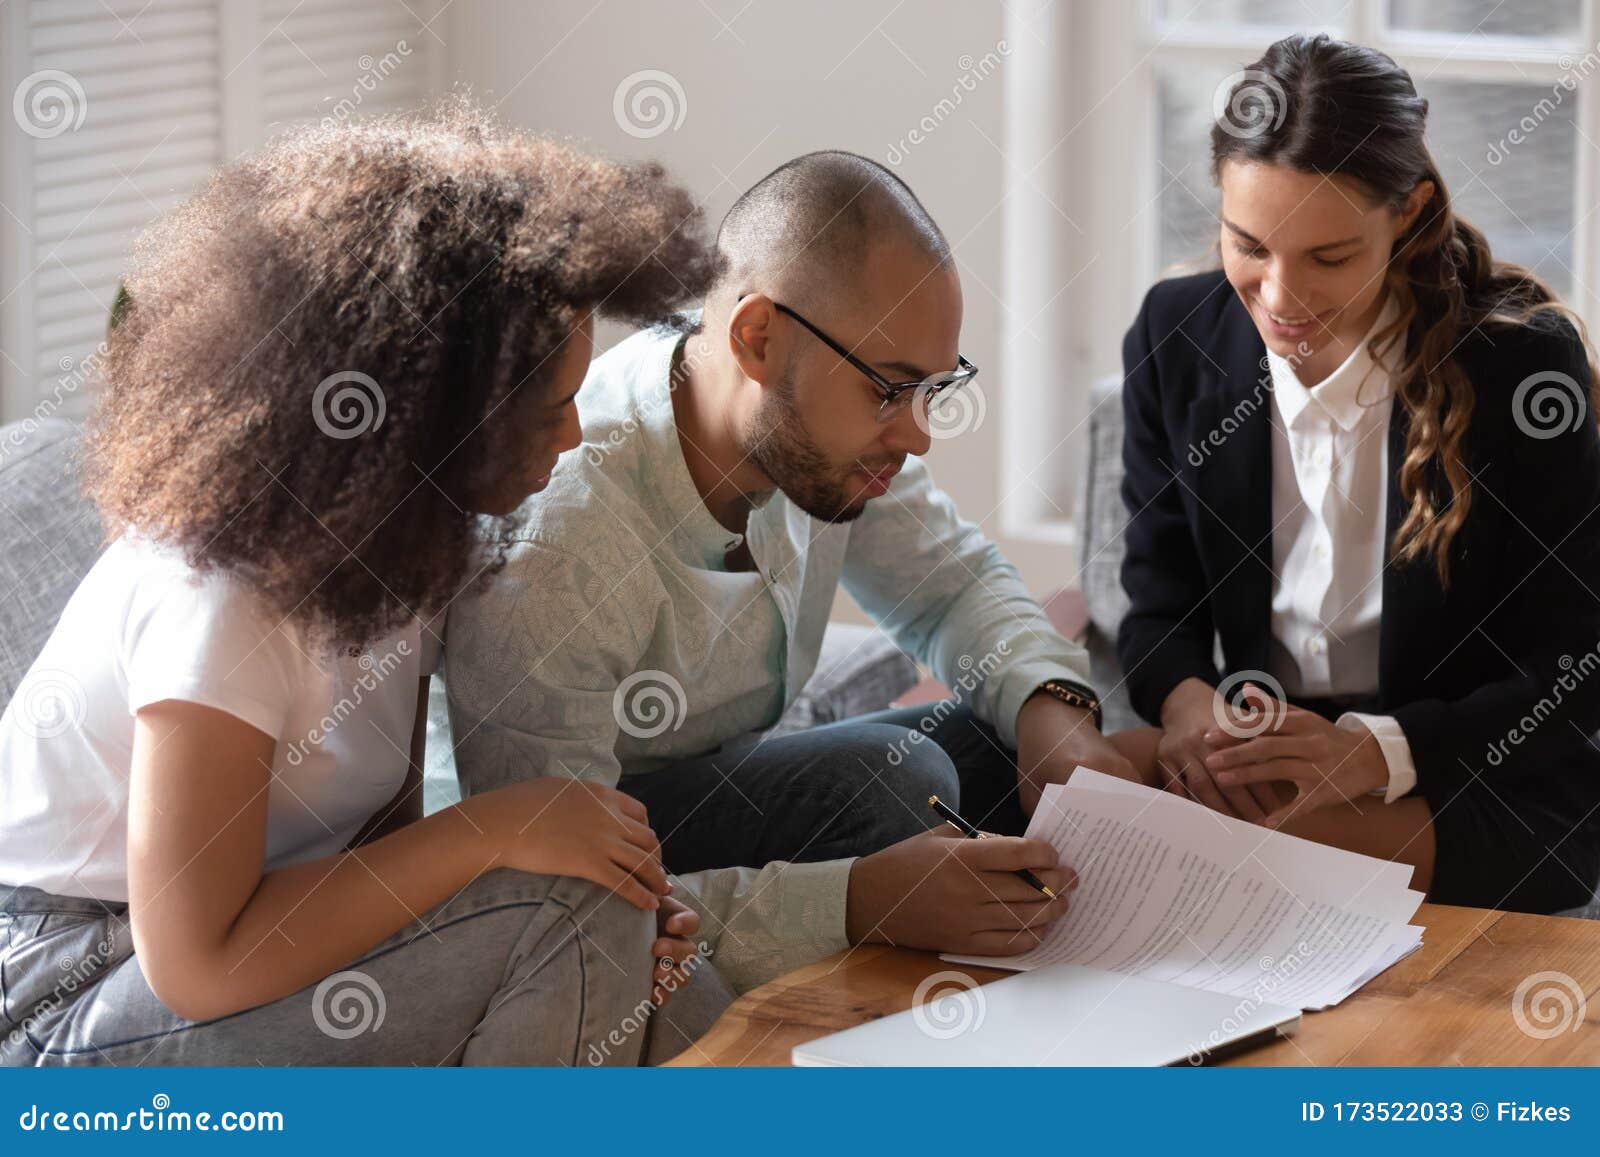 Notary American Girl X Videos - African Couple Meet with Notary or Lawyer Discuss Prenuptial Agreement  Stock Image - Image of american, bank: 173522033